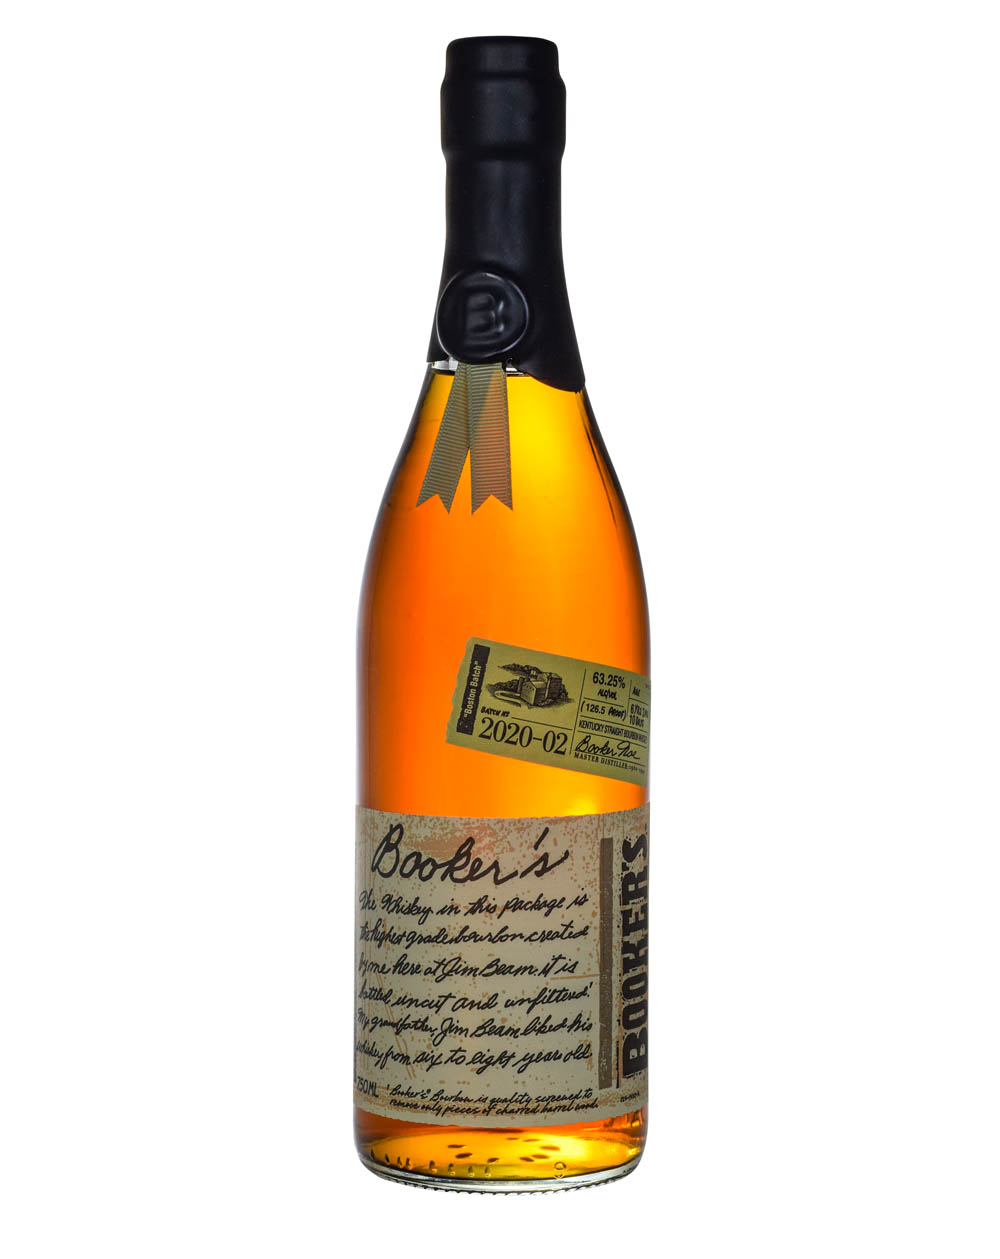 Booker's 2020-02 6 Years Old Musthave Malts MHM